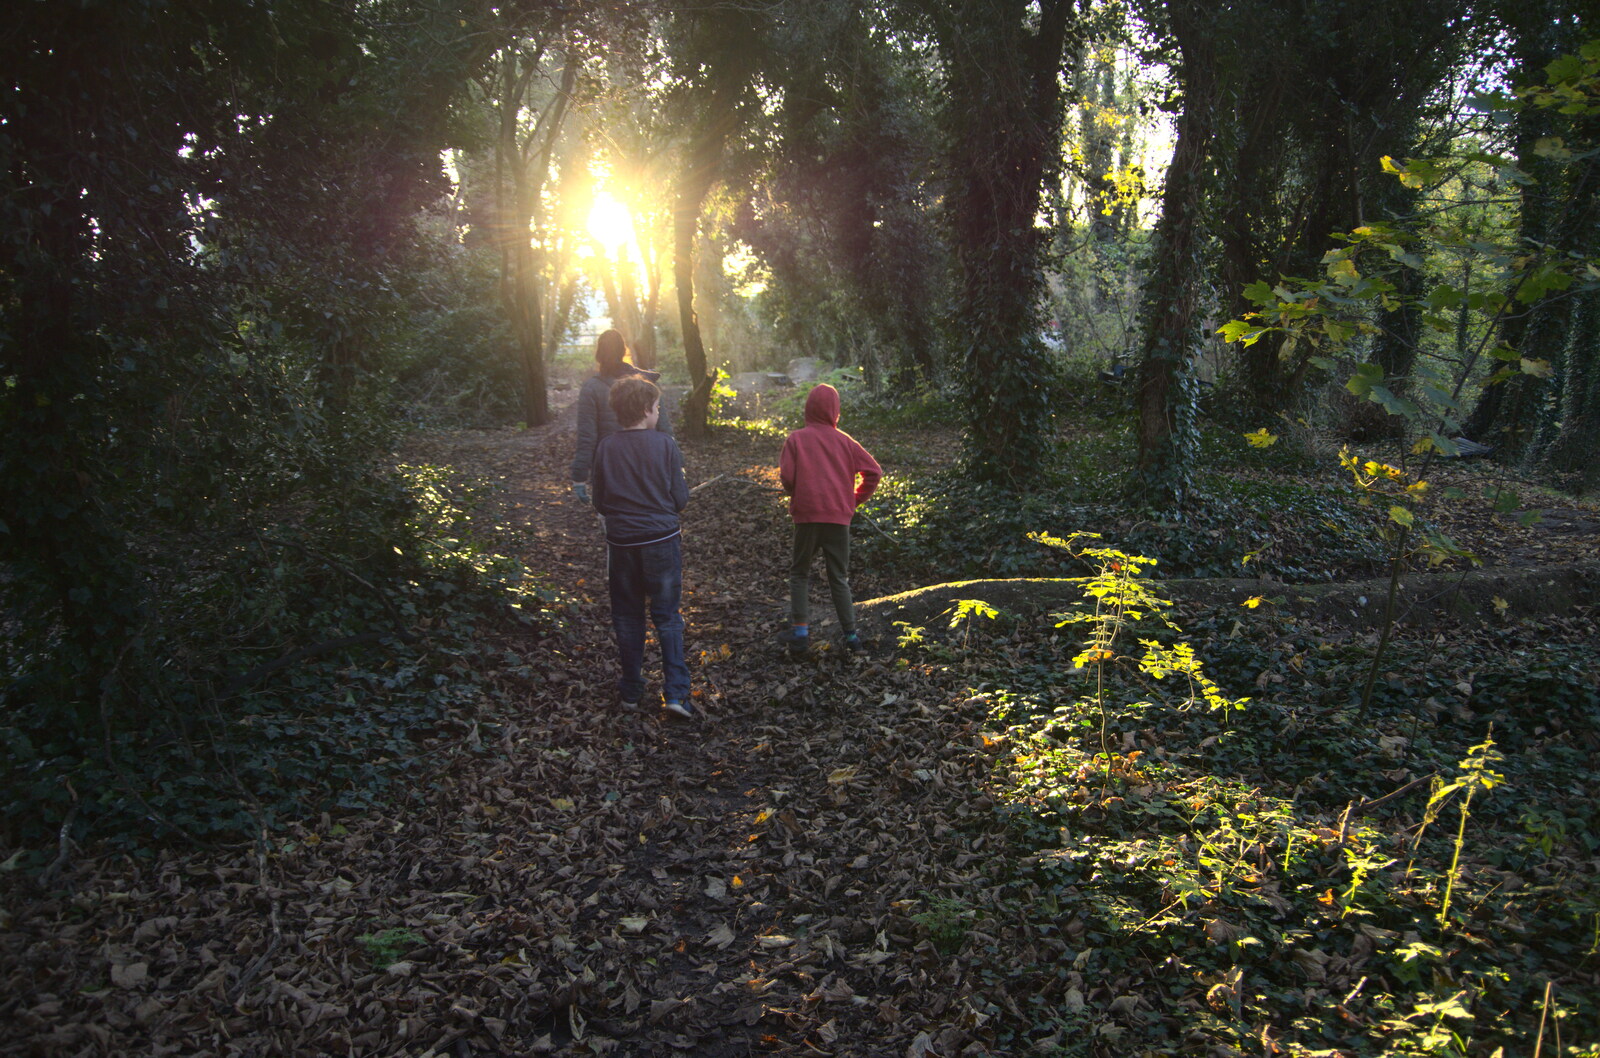 We're off in the woods again from The Dereliction of Eye, Suffolk - 22nd November 2020